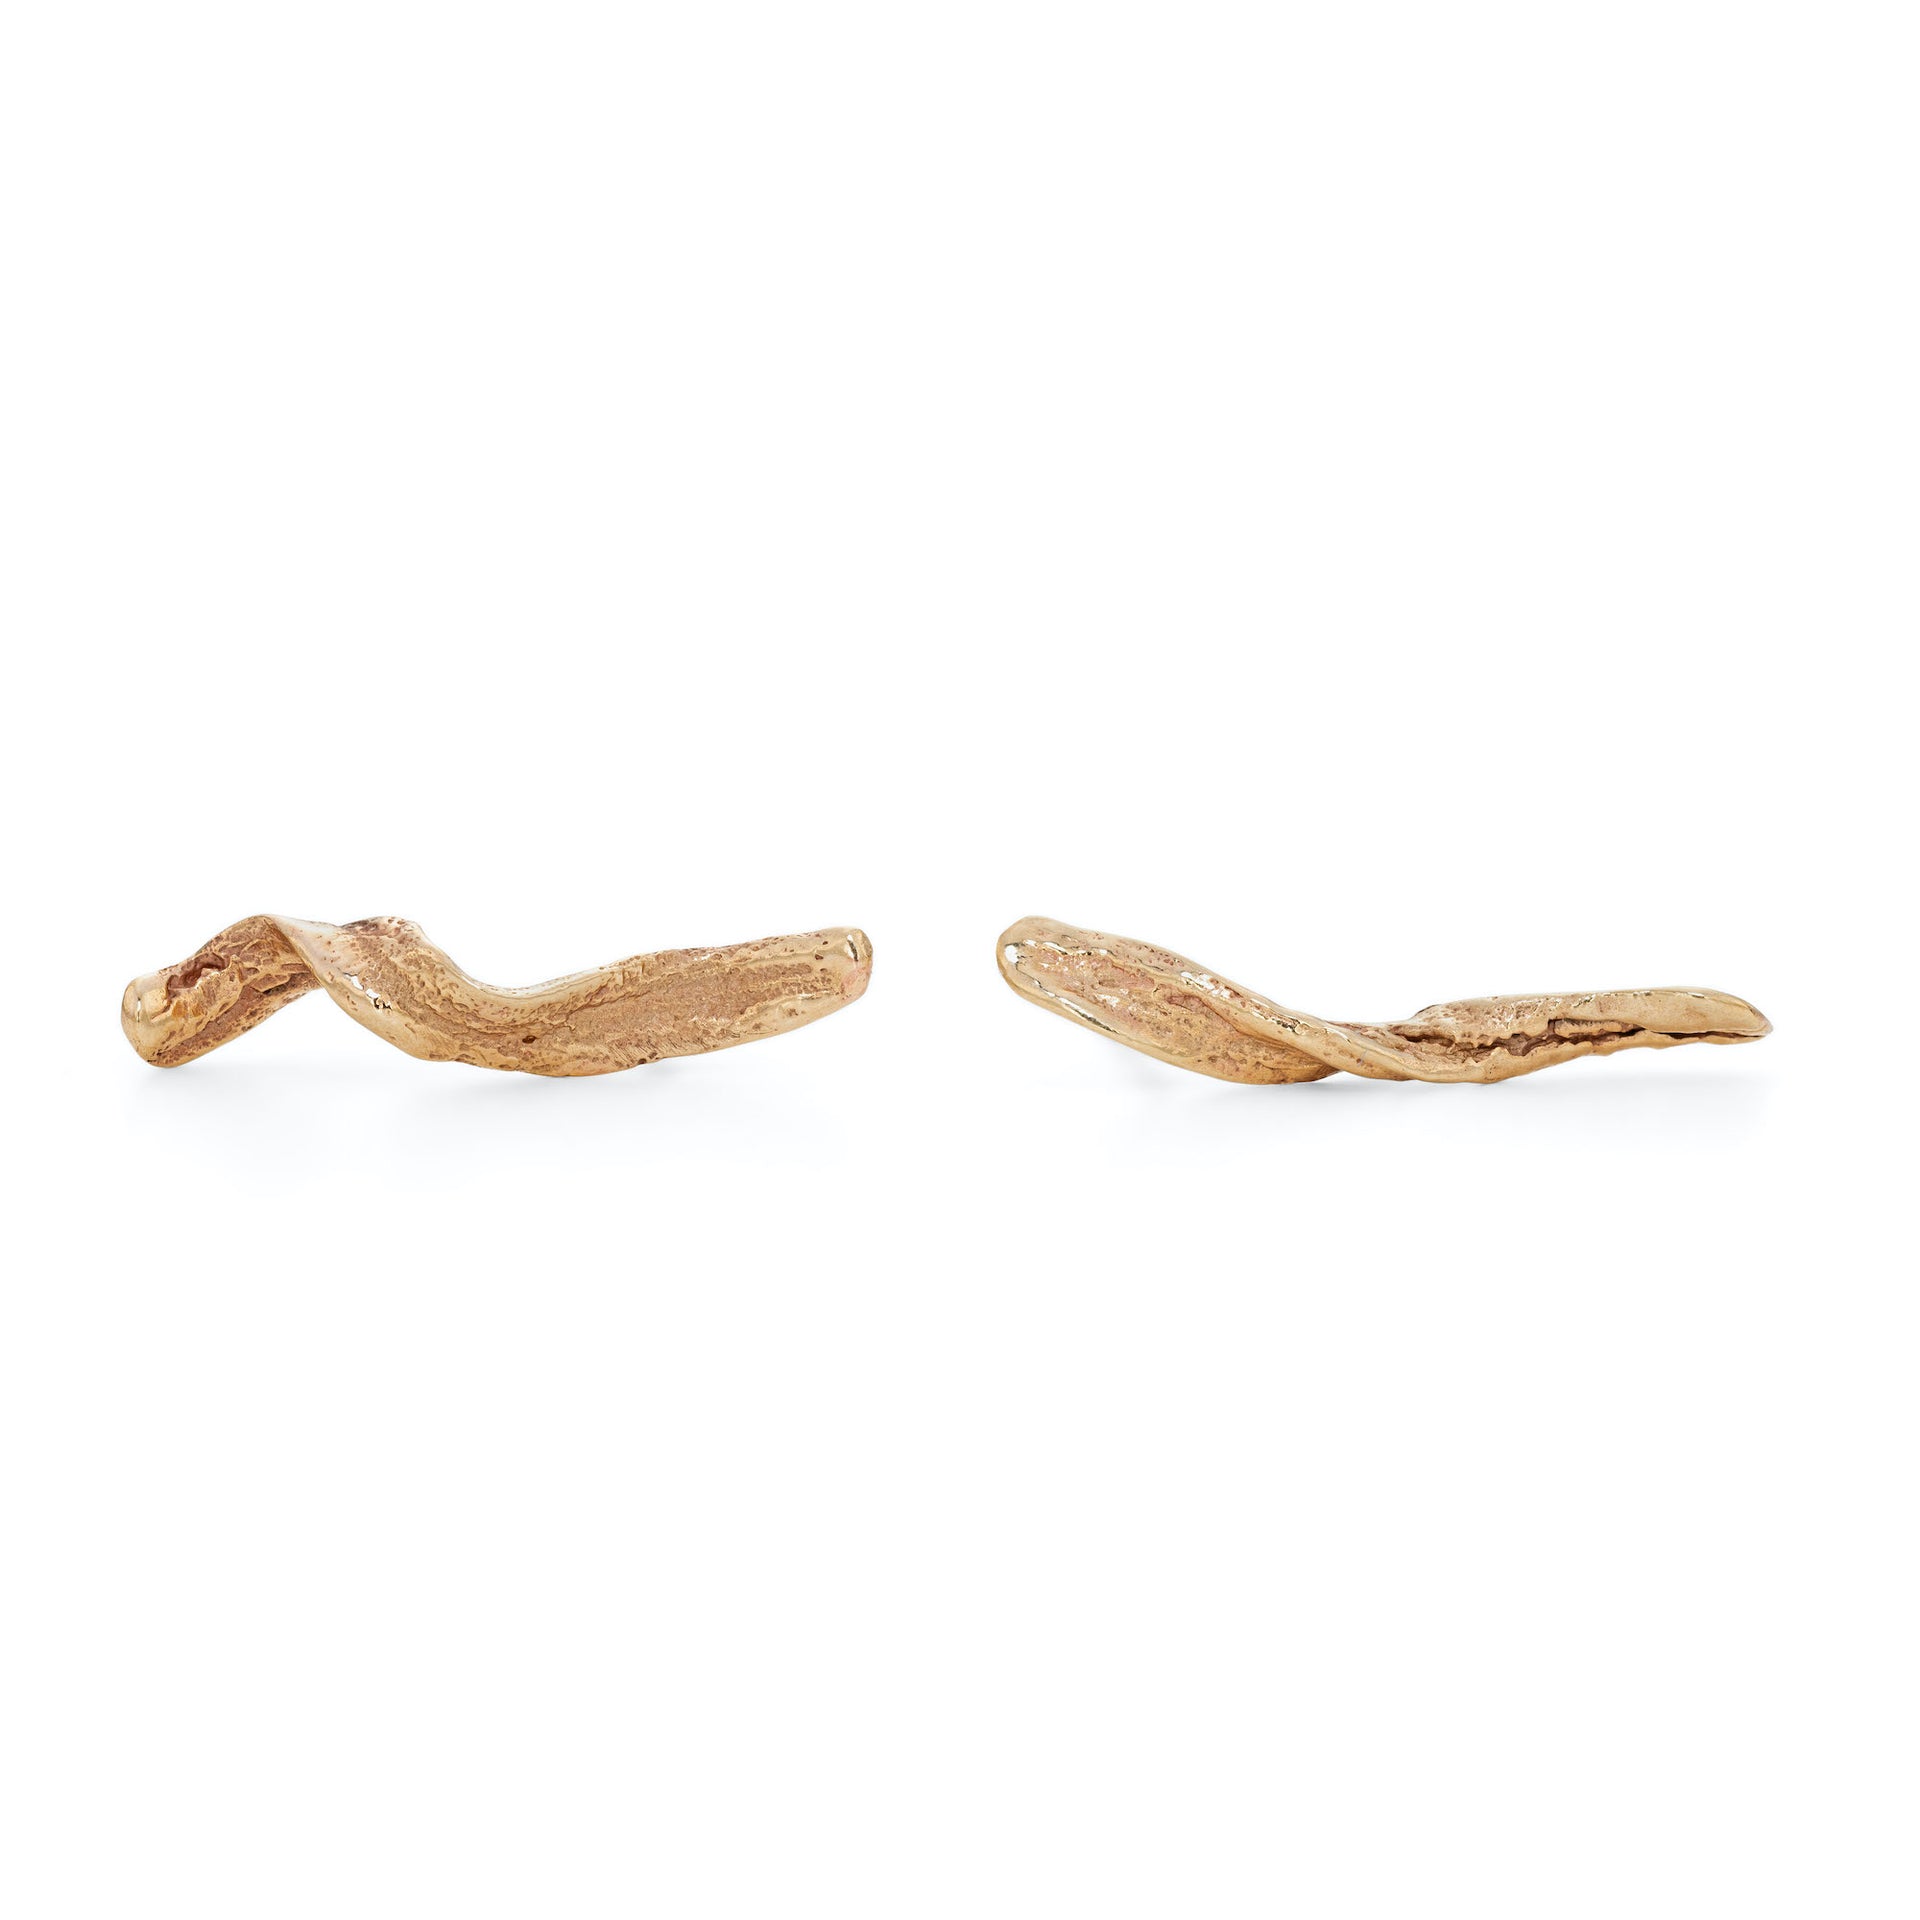 Contemporary 9ct Gold climber earrings, made by hand in Cornwall by Emily Nixon.